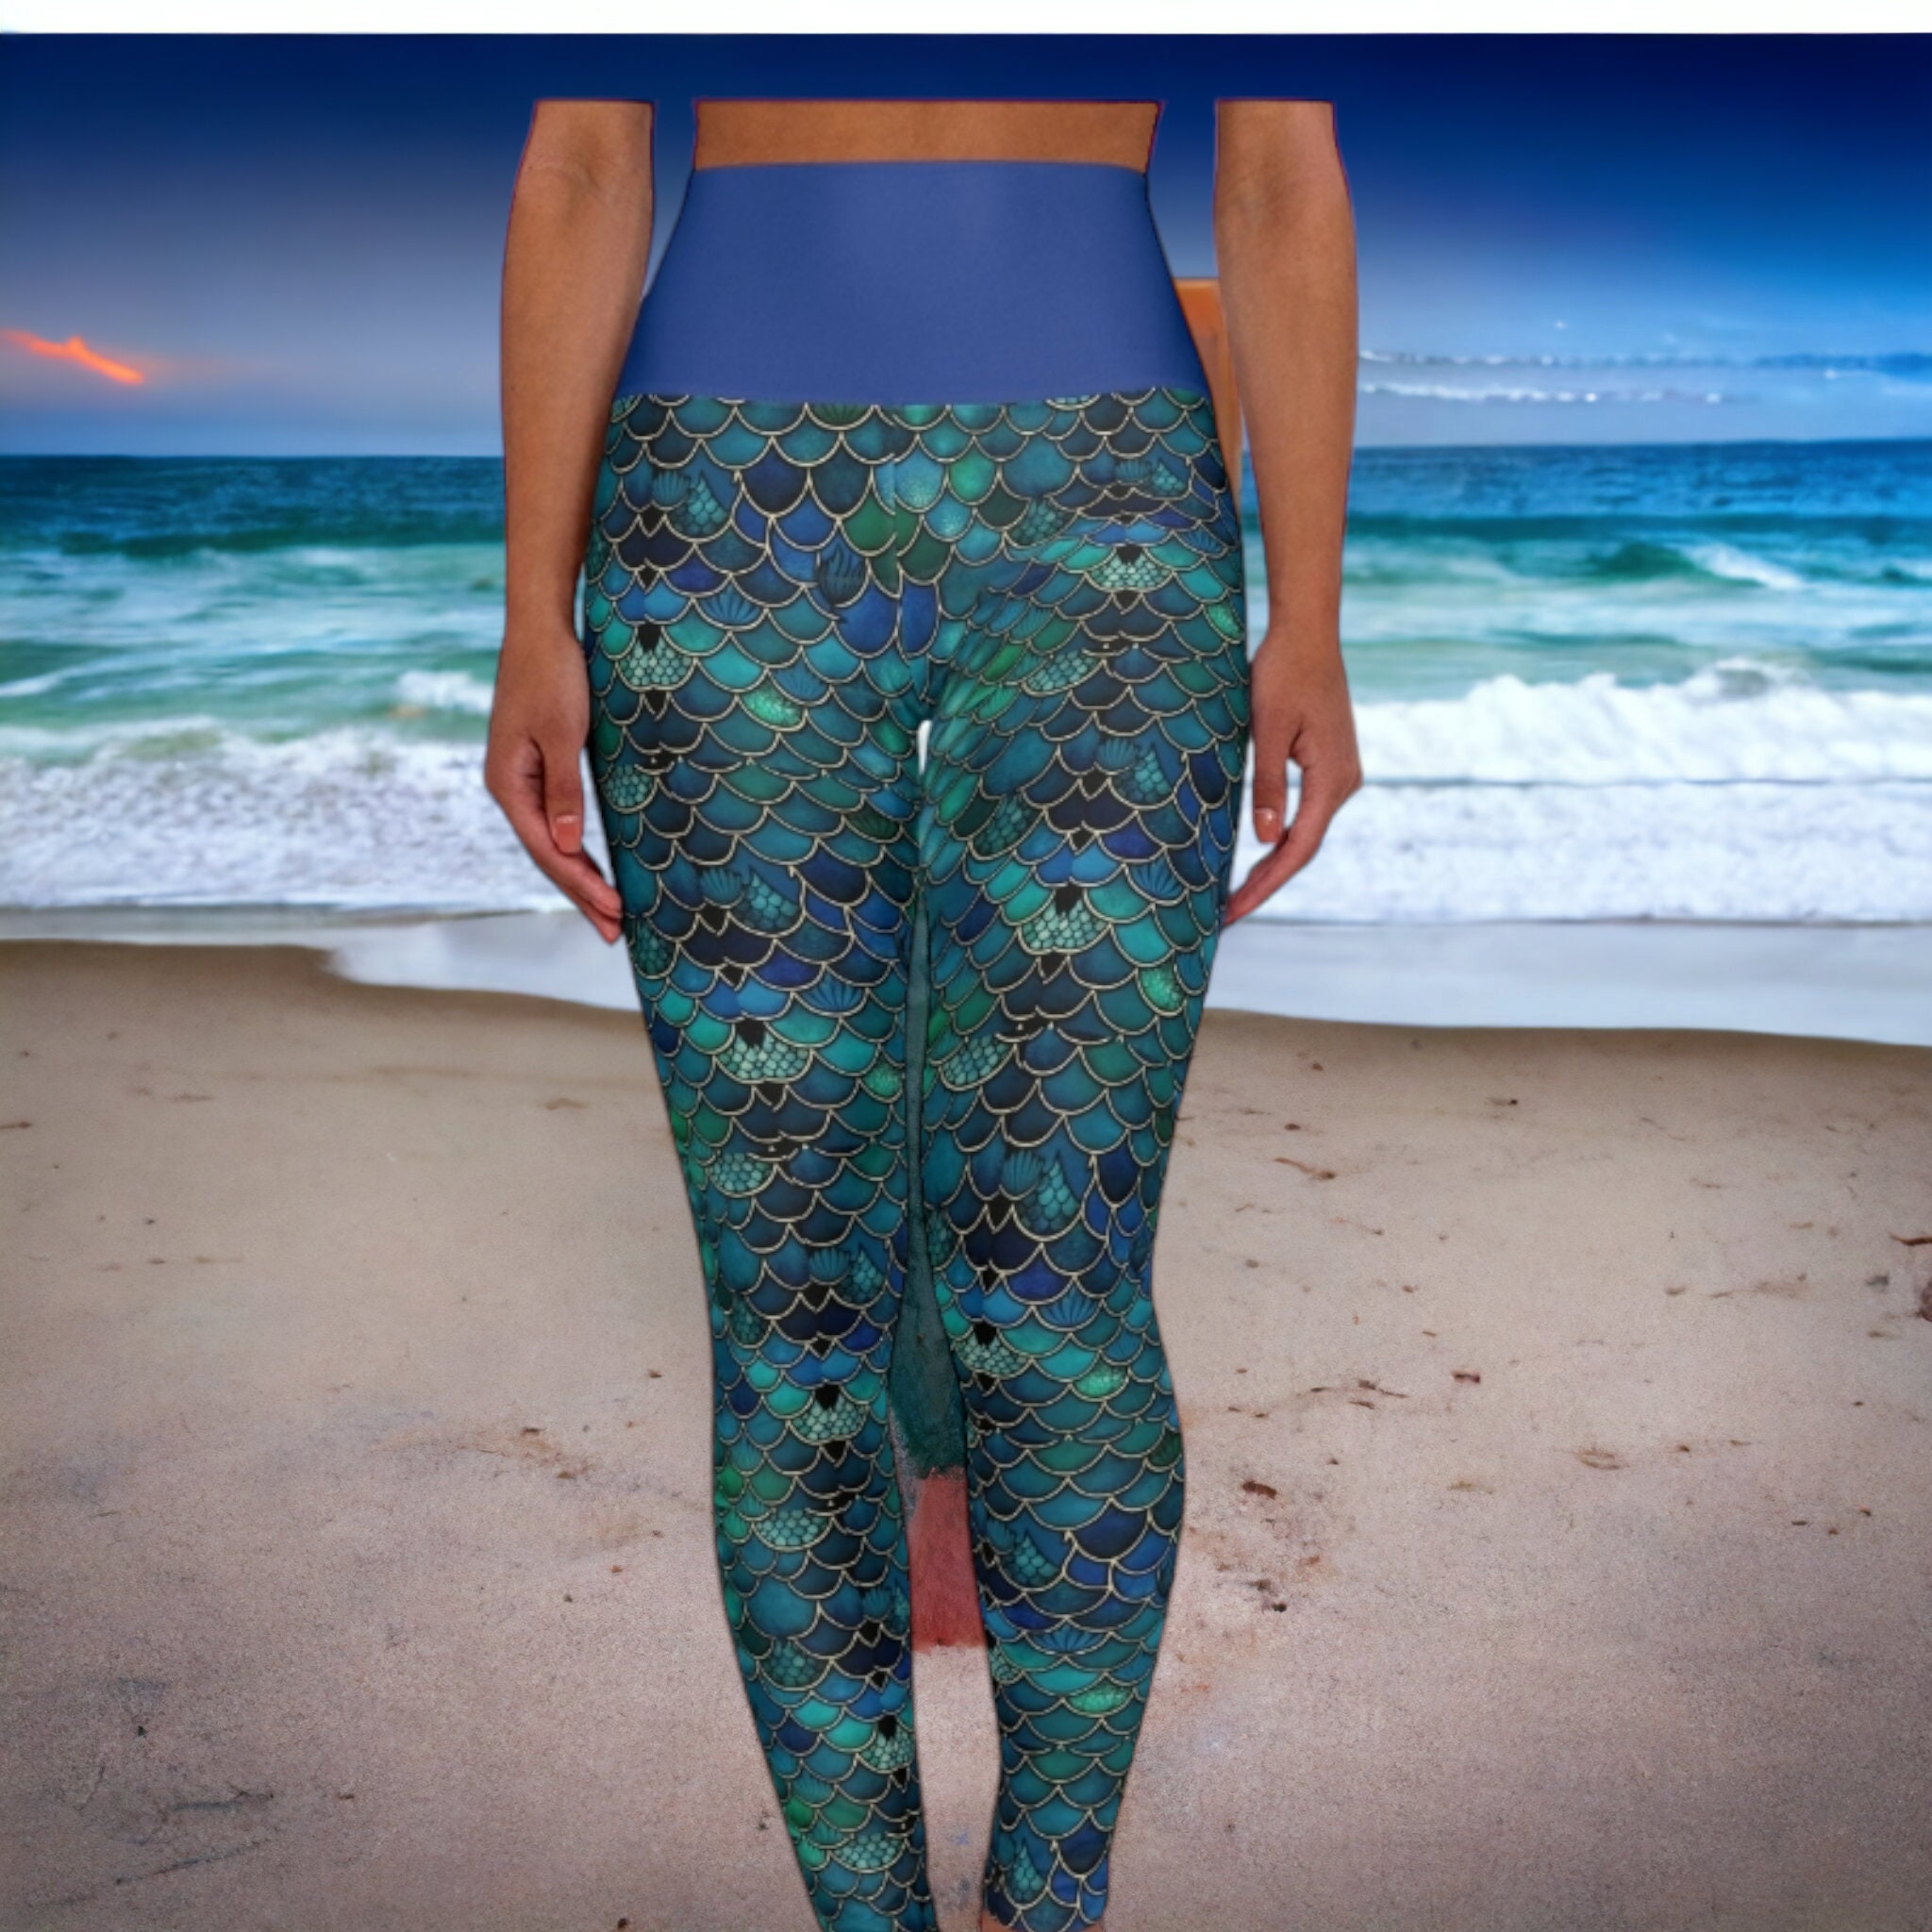 Mermaid Leggings, Little Mermaid Leggings, Leggings, Girls Leggings, Womens  Leggings, Plus Size, Gift for Her, Gifts, Yoga, Workout 